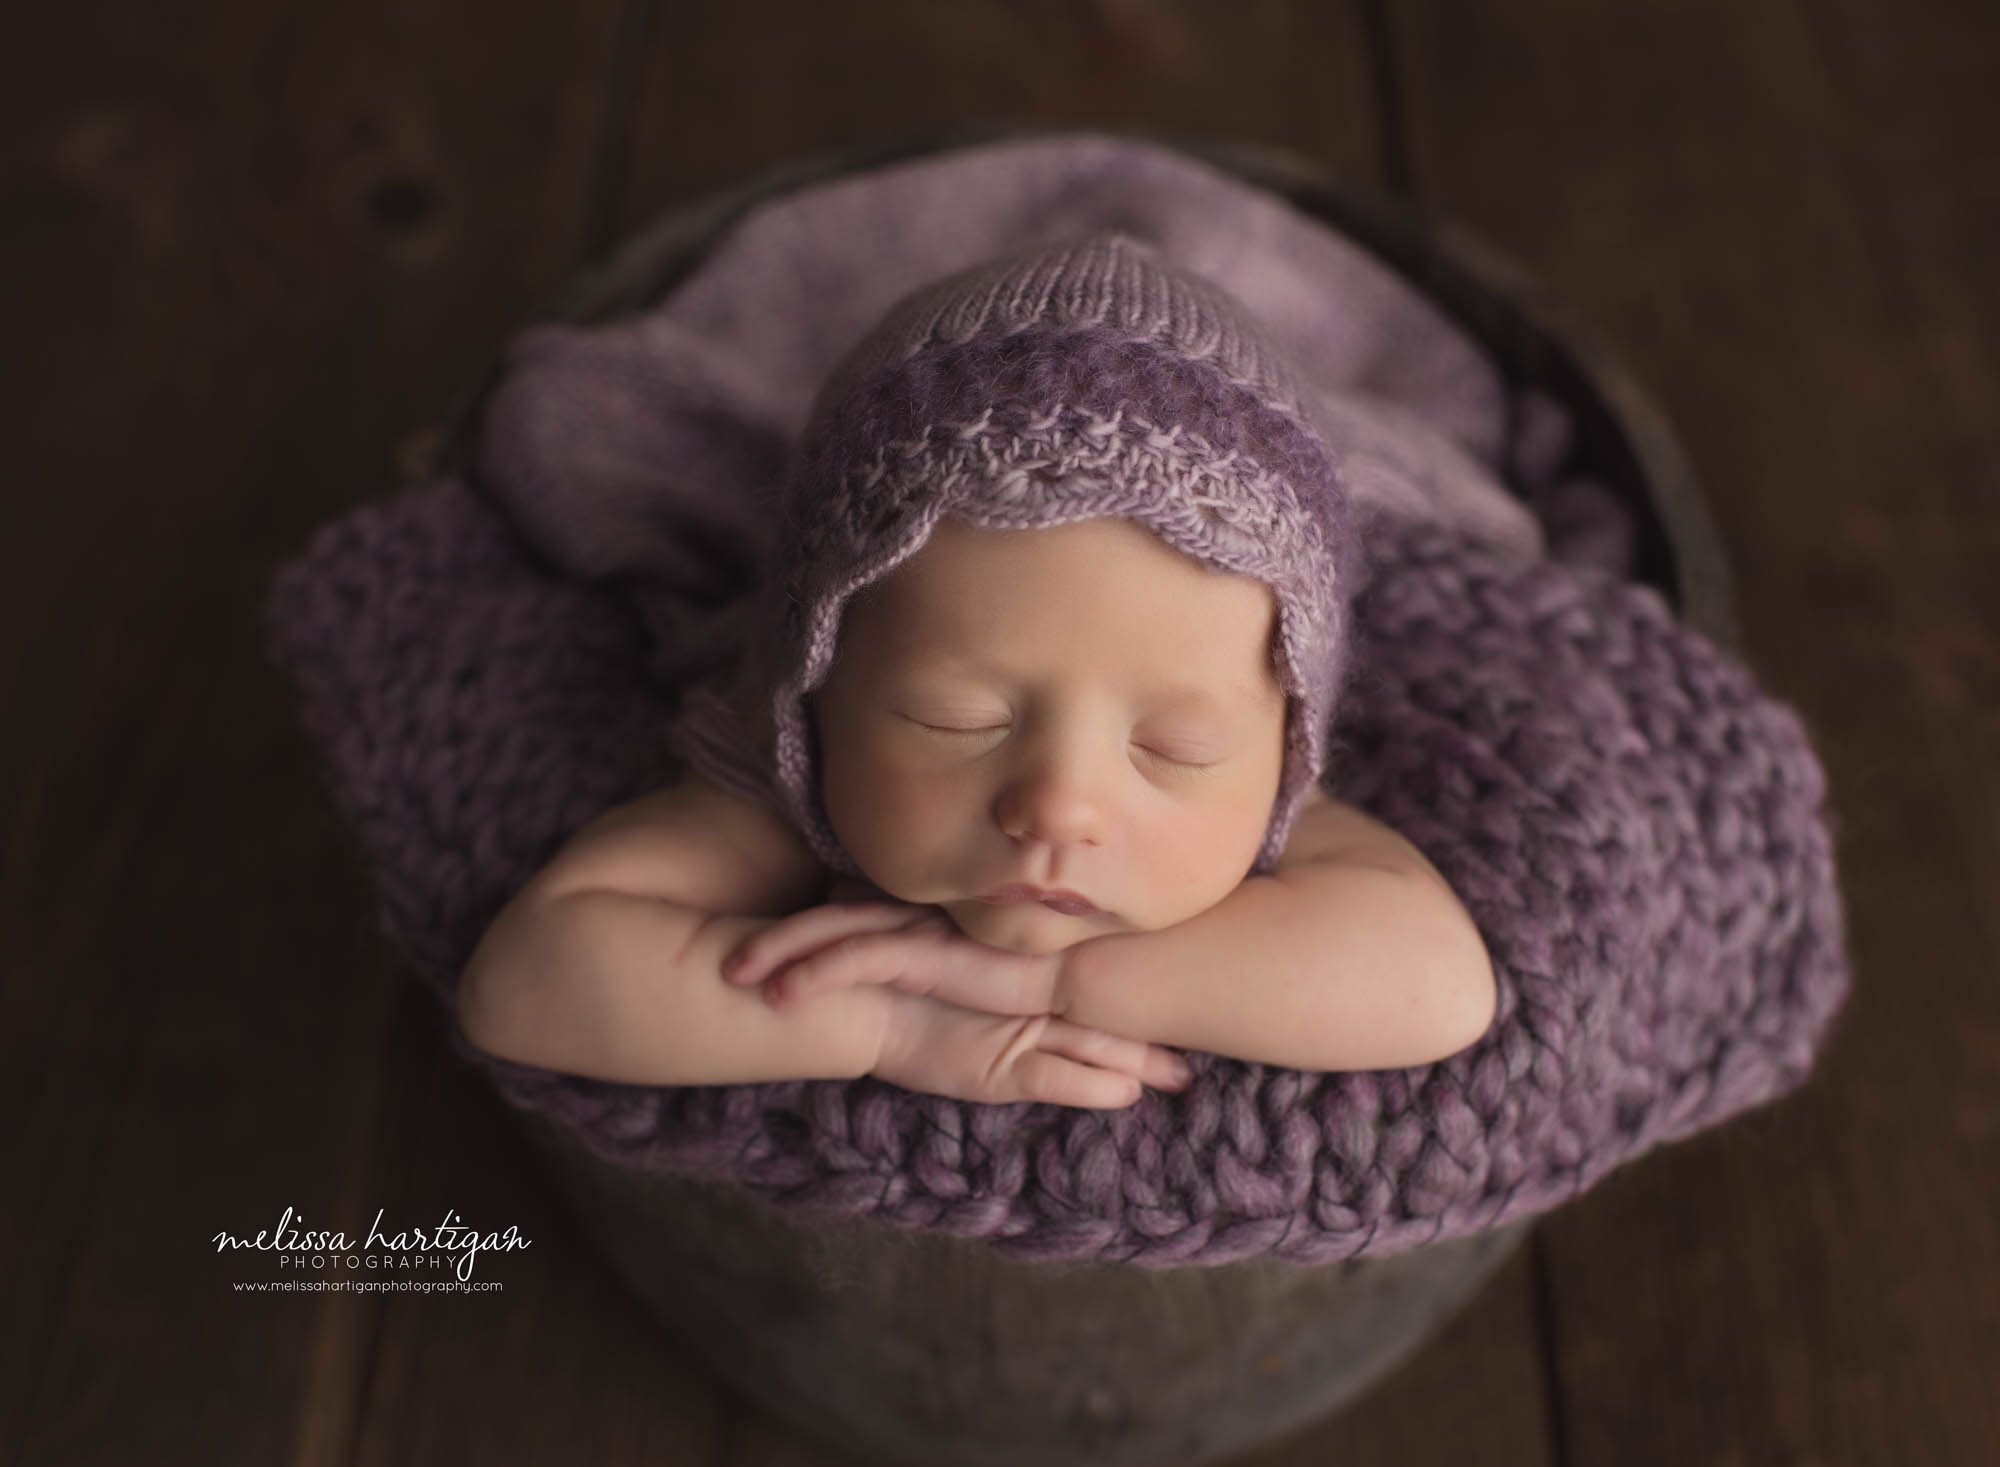 Baby girl wearing purple knitted bonnet posed in bucket Baby photography CT